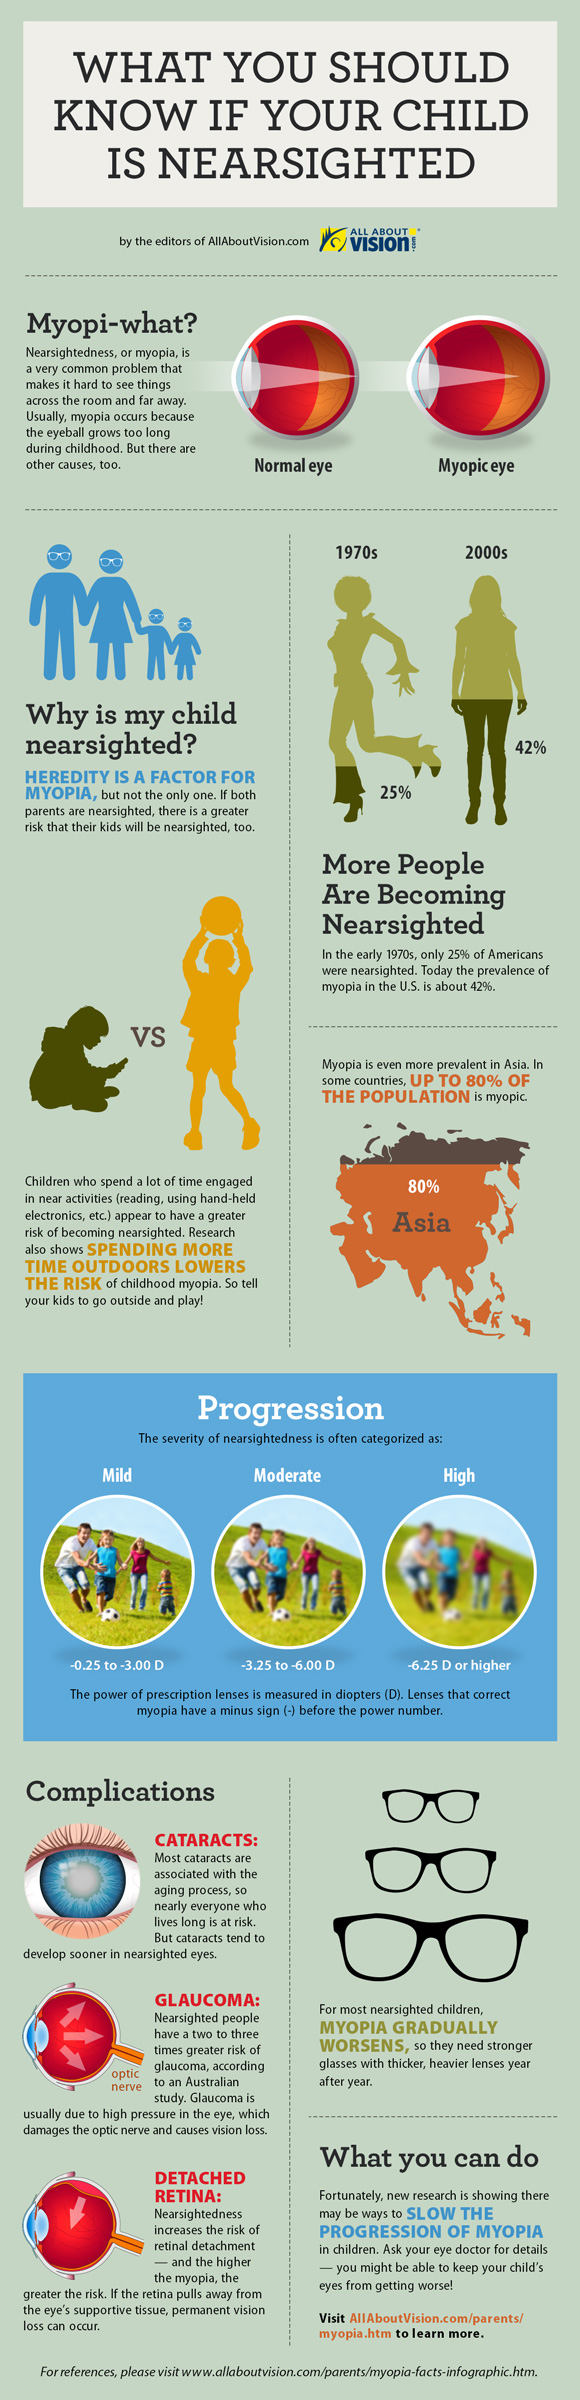 What you should know if your child is nearsighted